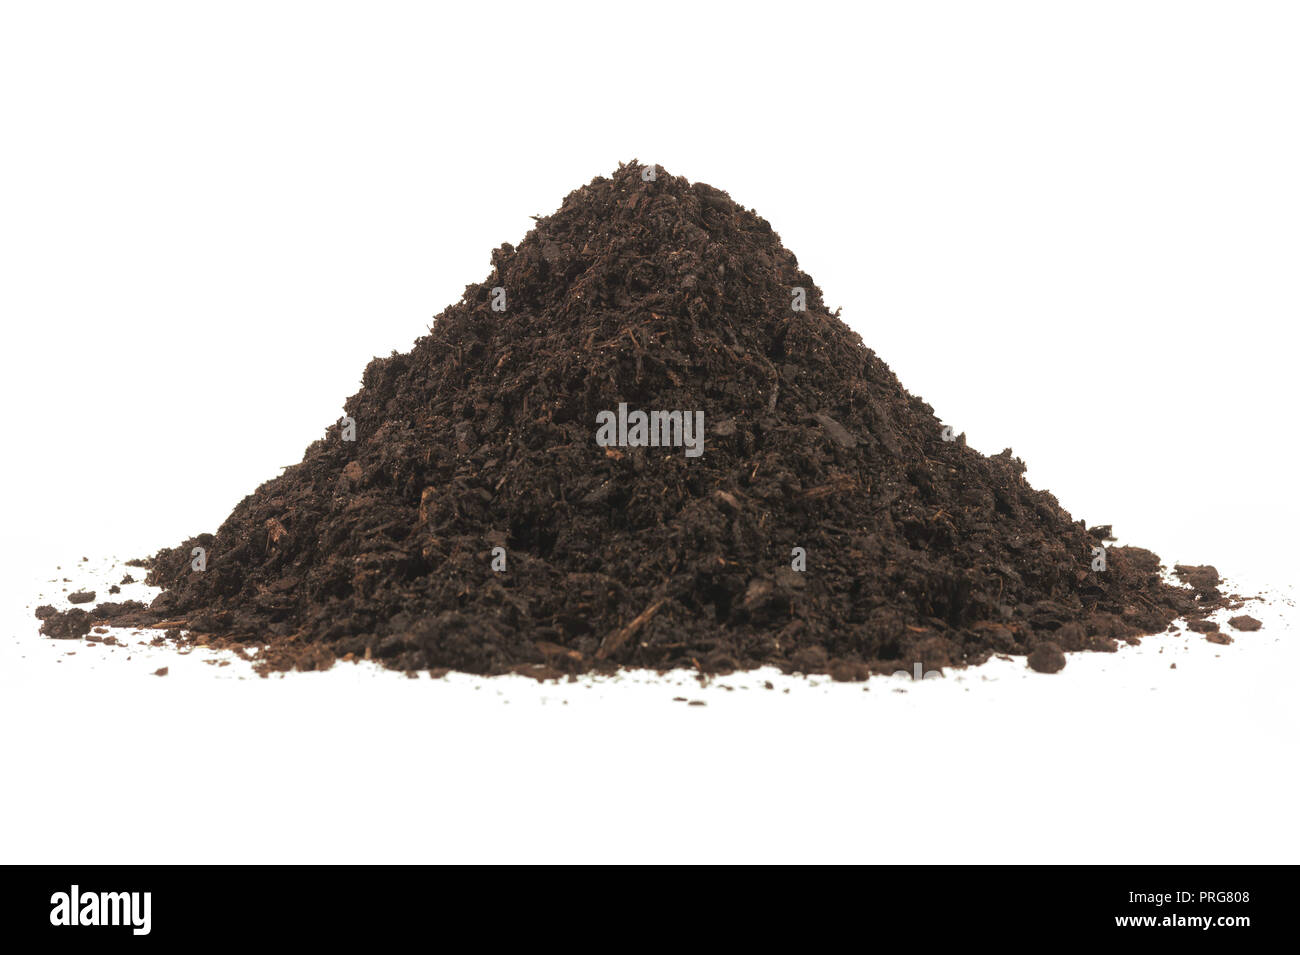 Pile heap soil humus isolated over a white background. Stock Photo